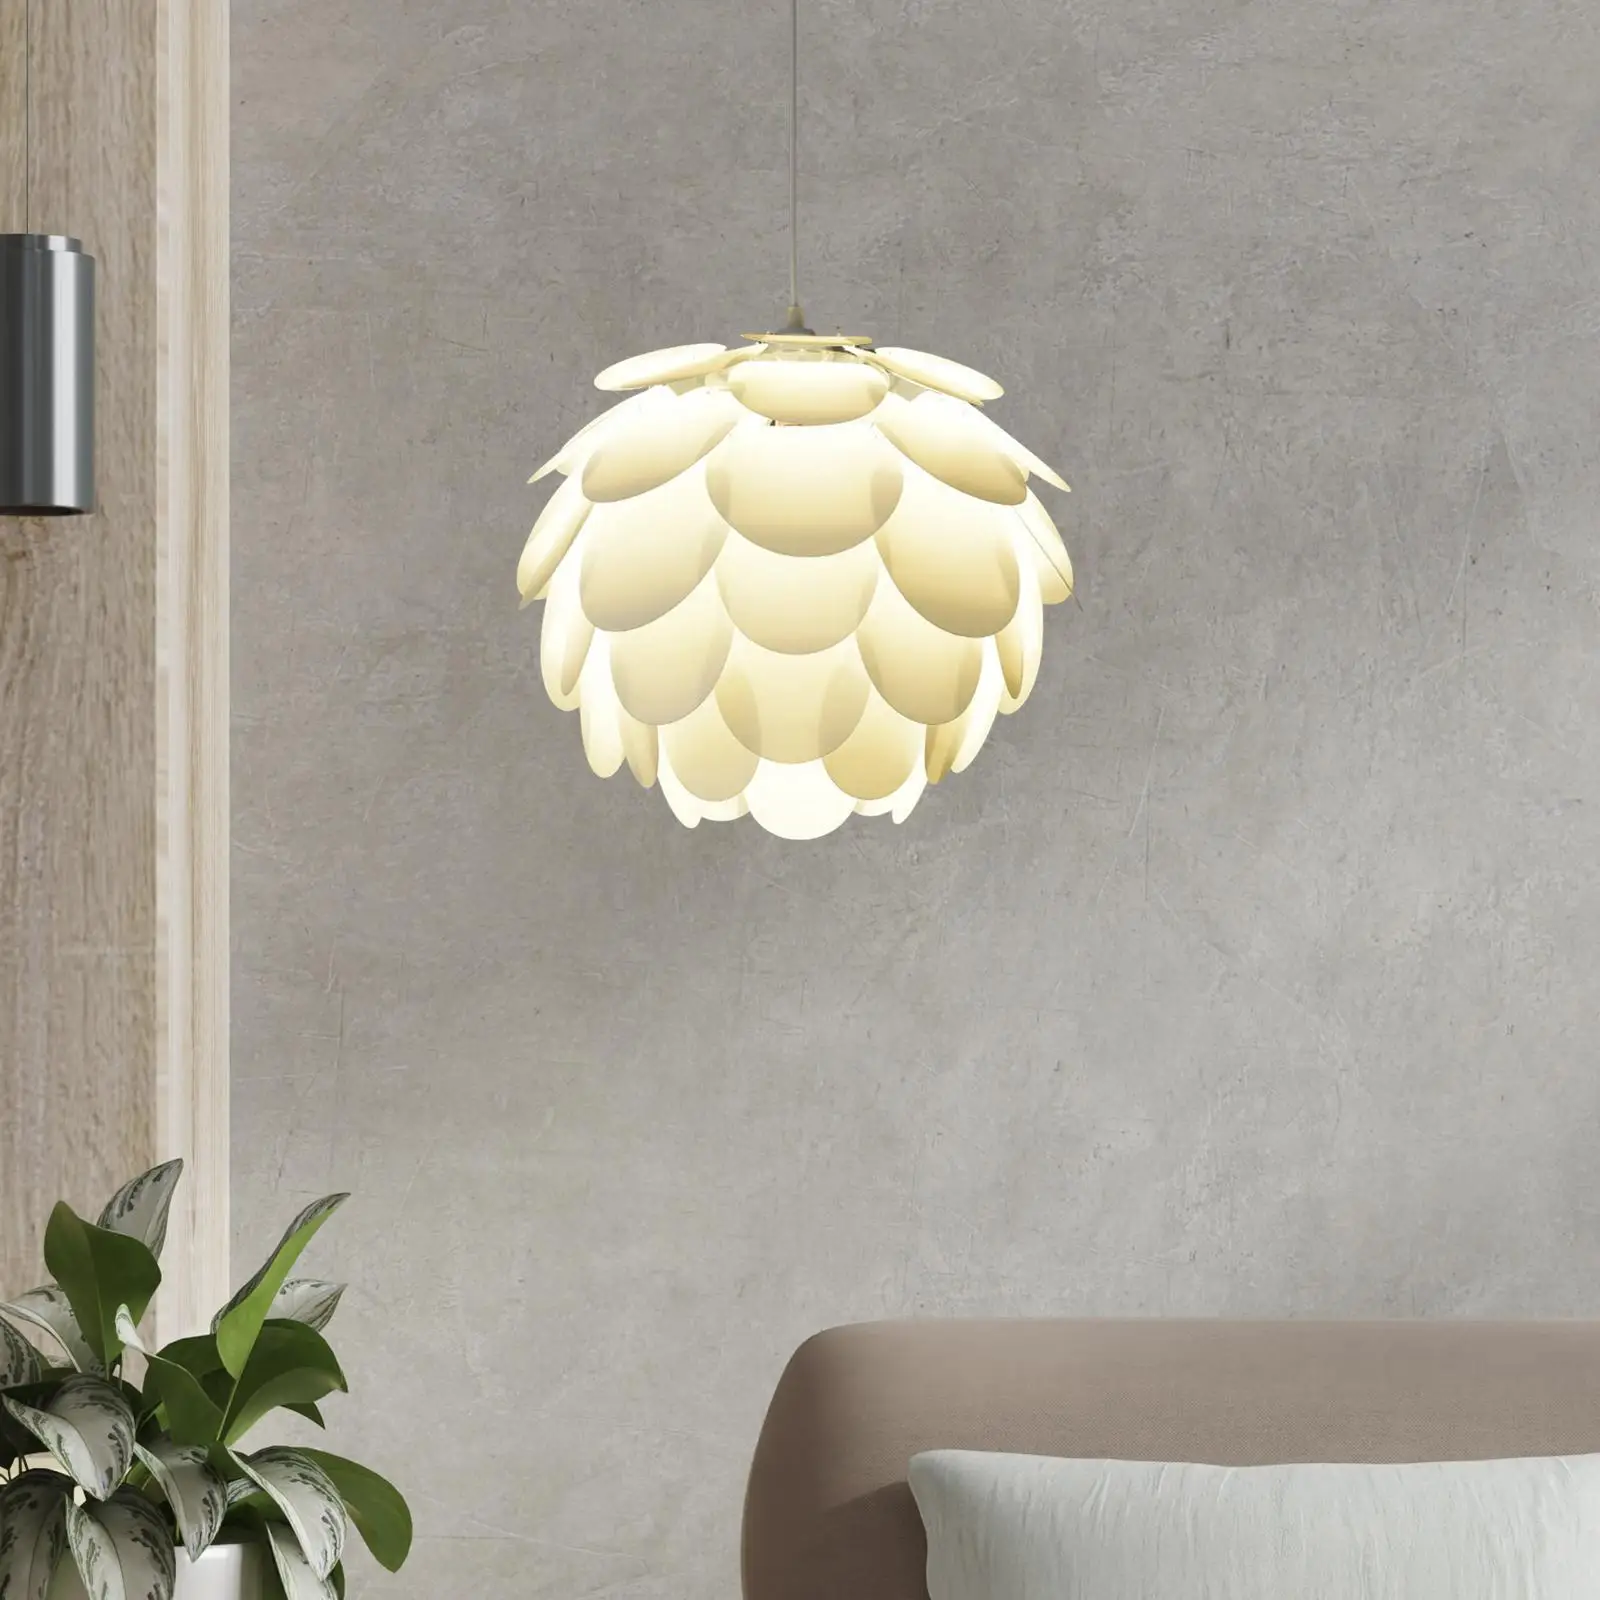 Decorative Lamp Shade Light Fixture Cover Crafts Ceiling Light Shade Minimalist for Library Home Bar Cafe Hotel Decor